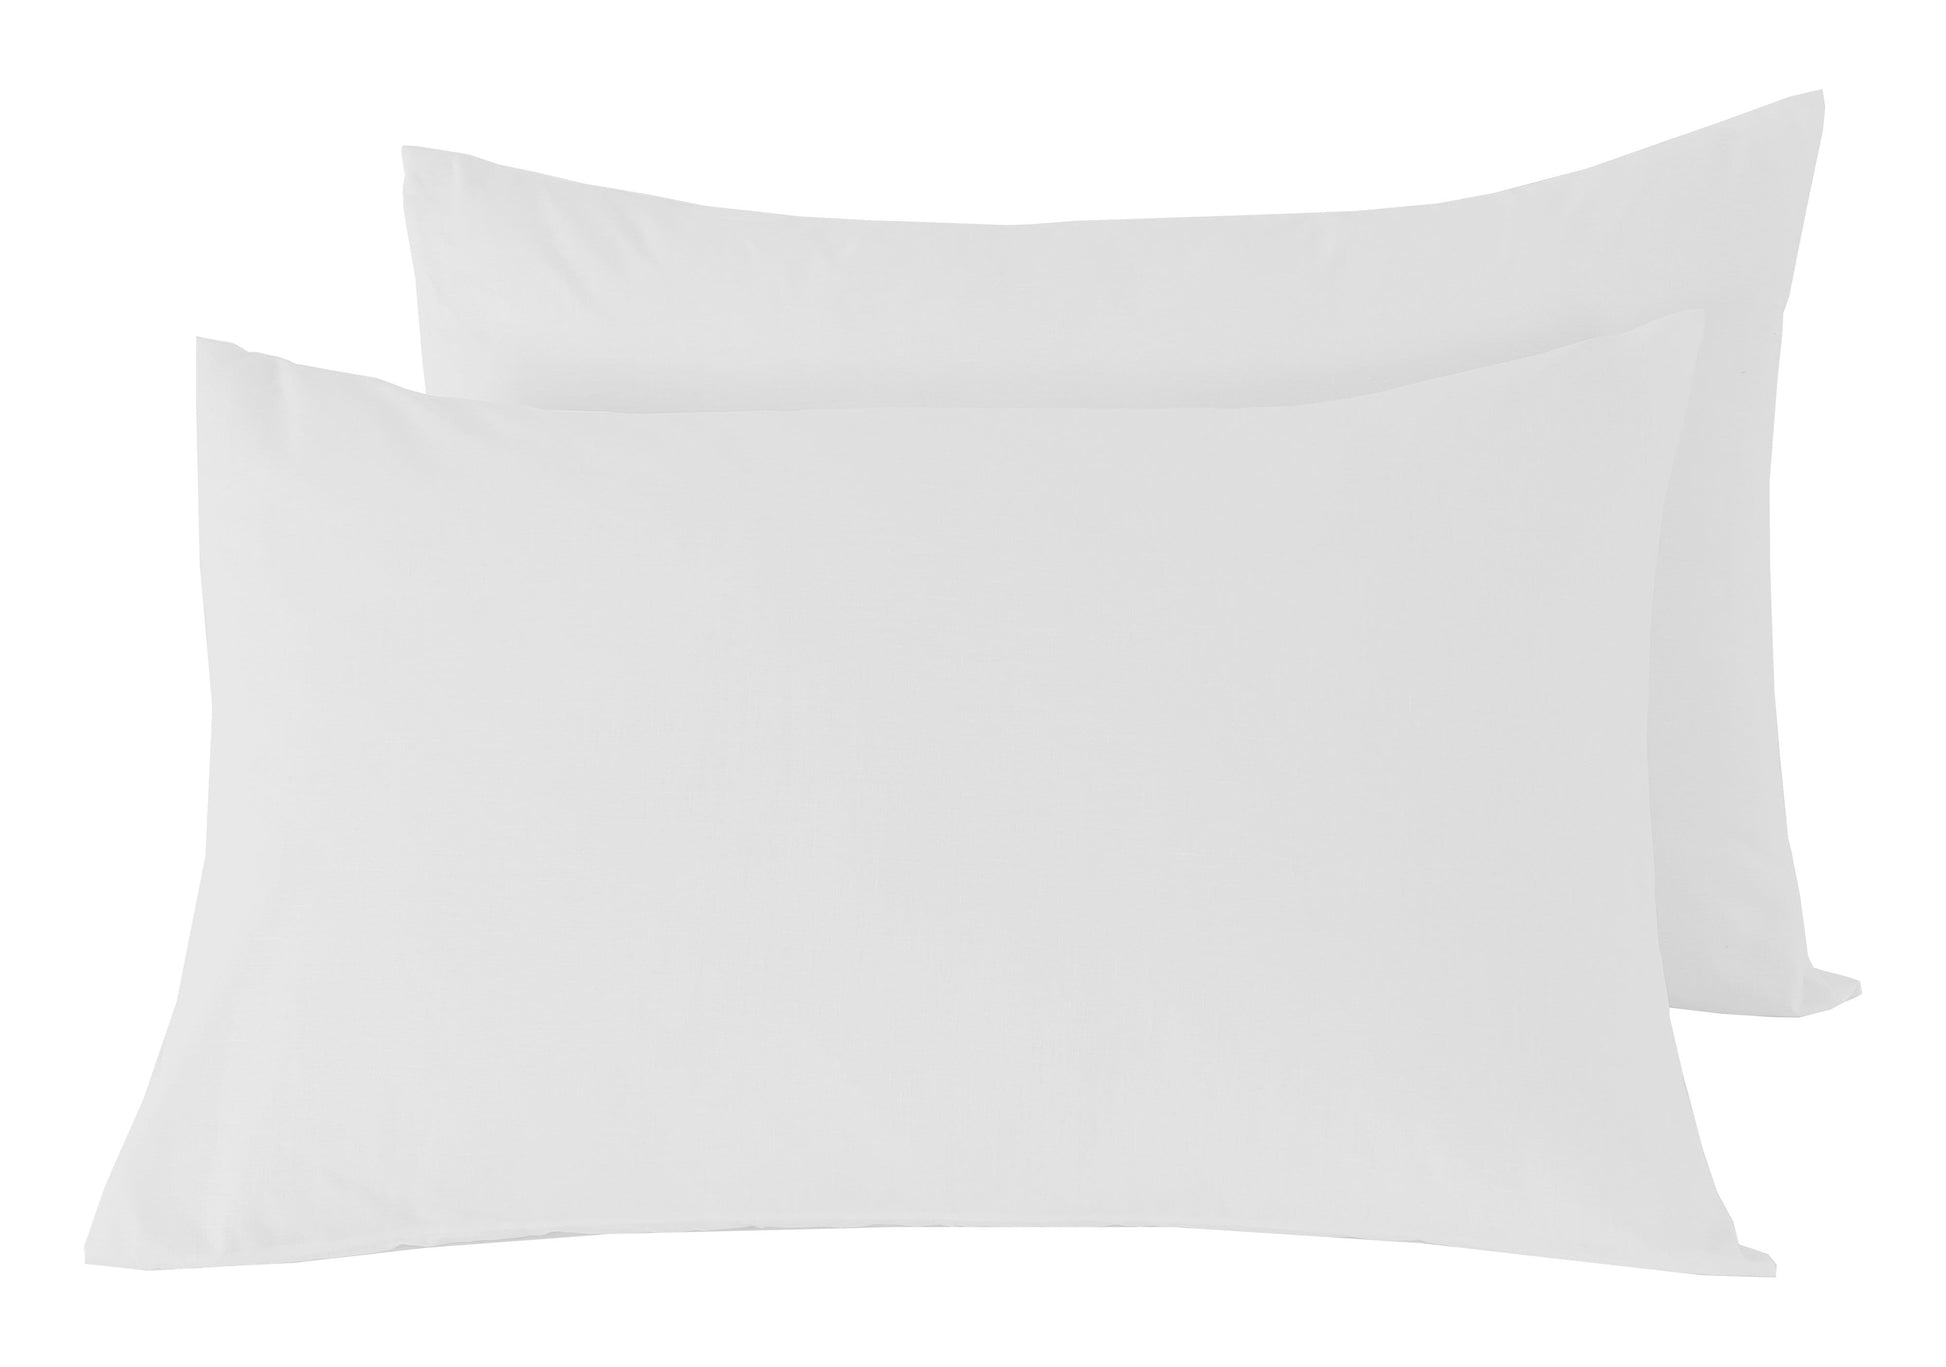 Basics Fitted Sheet PILLOWCASES / WHITE OLIVIA ROCCO basics Fitted Sheet